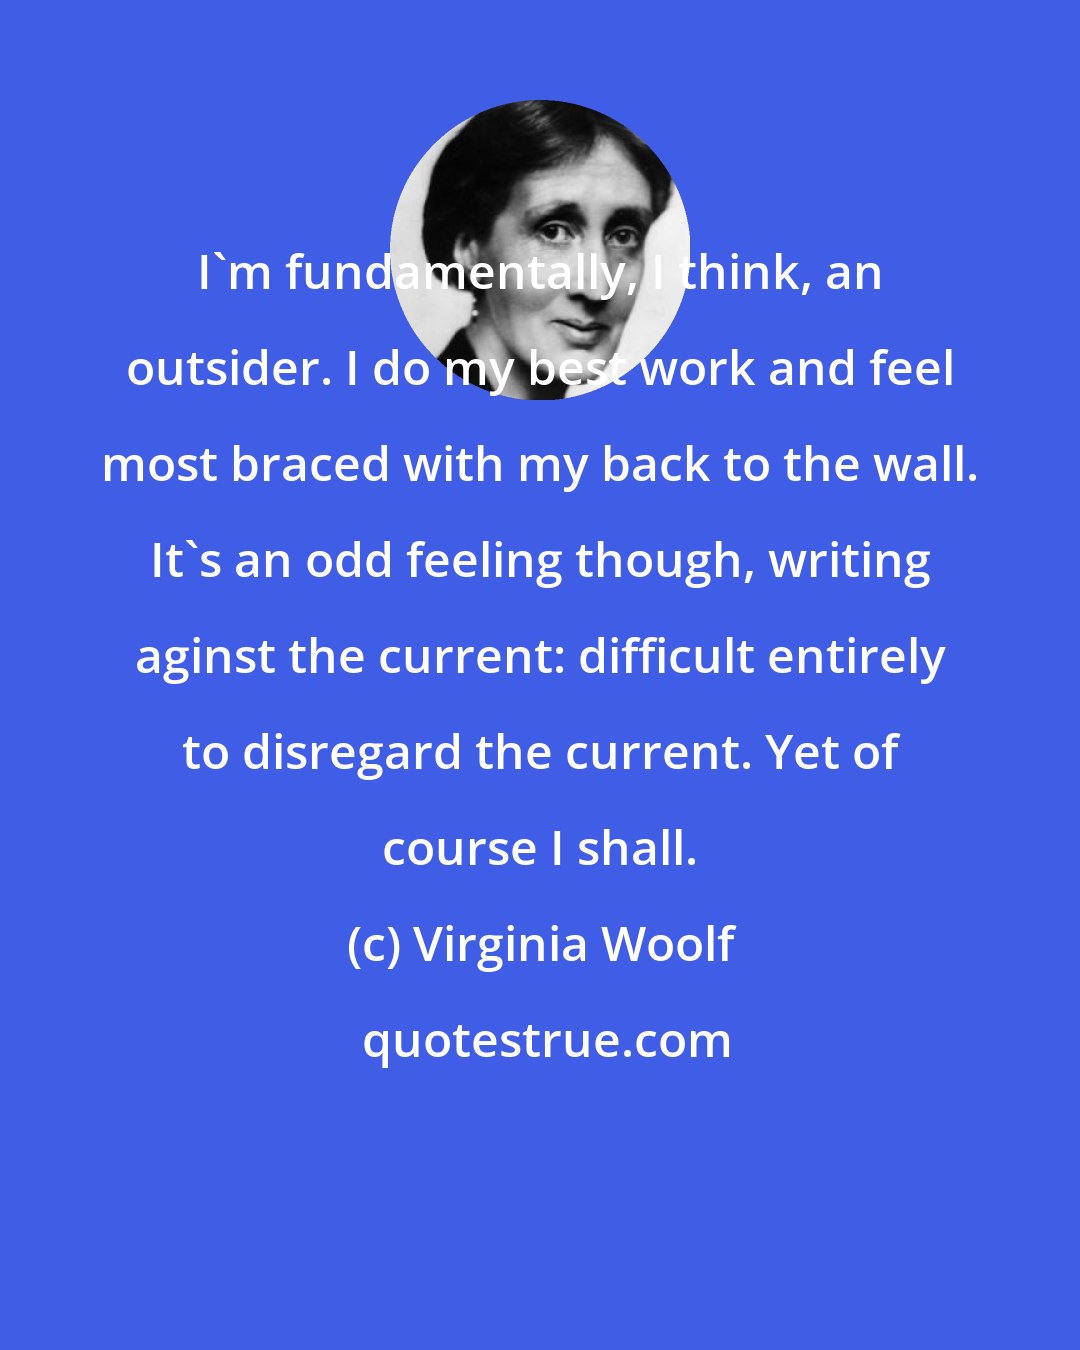 Virginia Woolf: I'm fundamentally, I think, an outsider. I do my best work and feel most braced with my back to the wall. It's an odd feeling though, writing aginst the current: difficult entirely to disregard the current. Yet of course I shall.